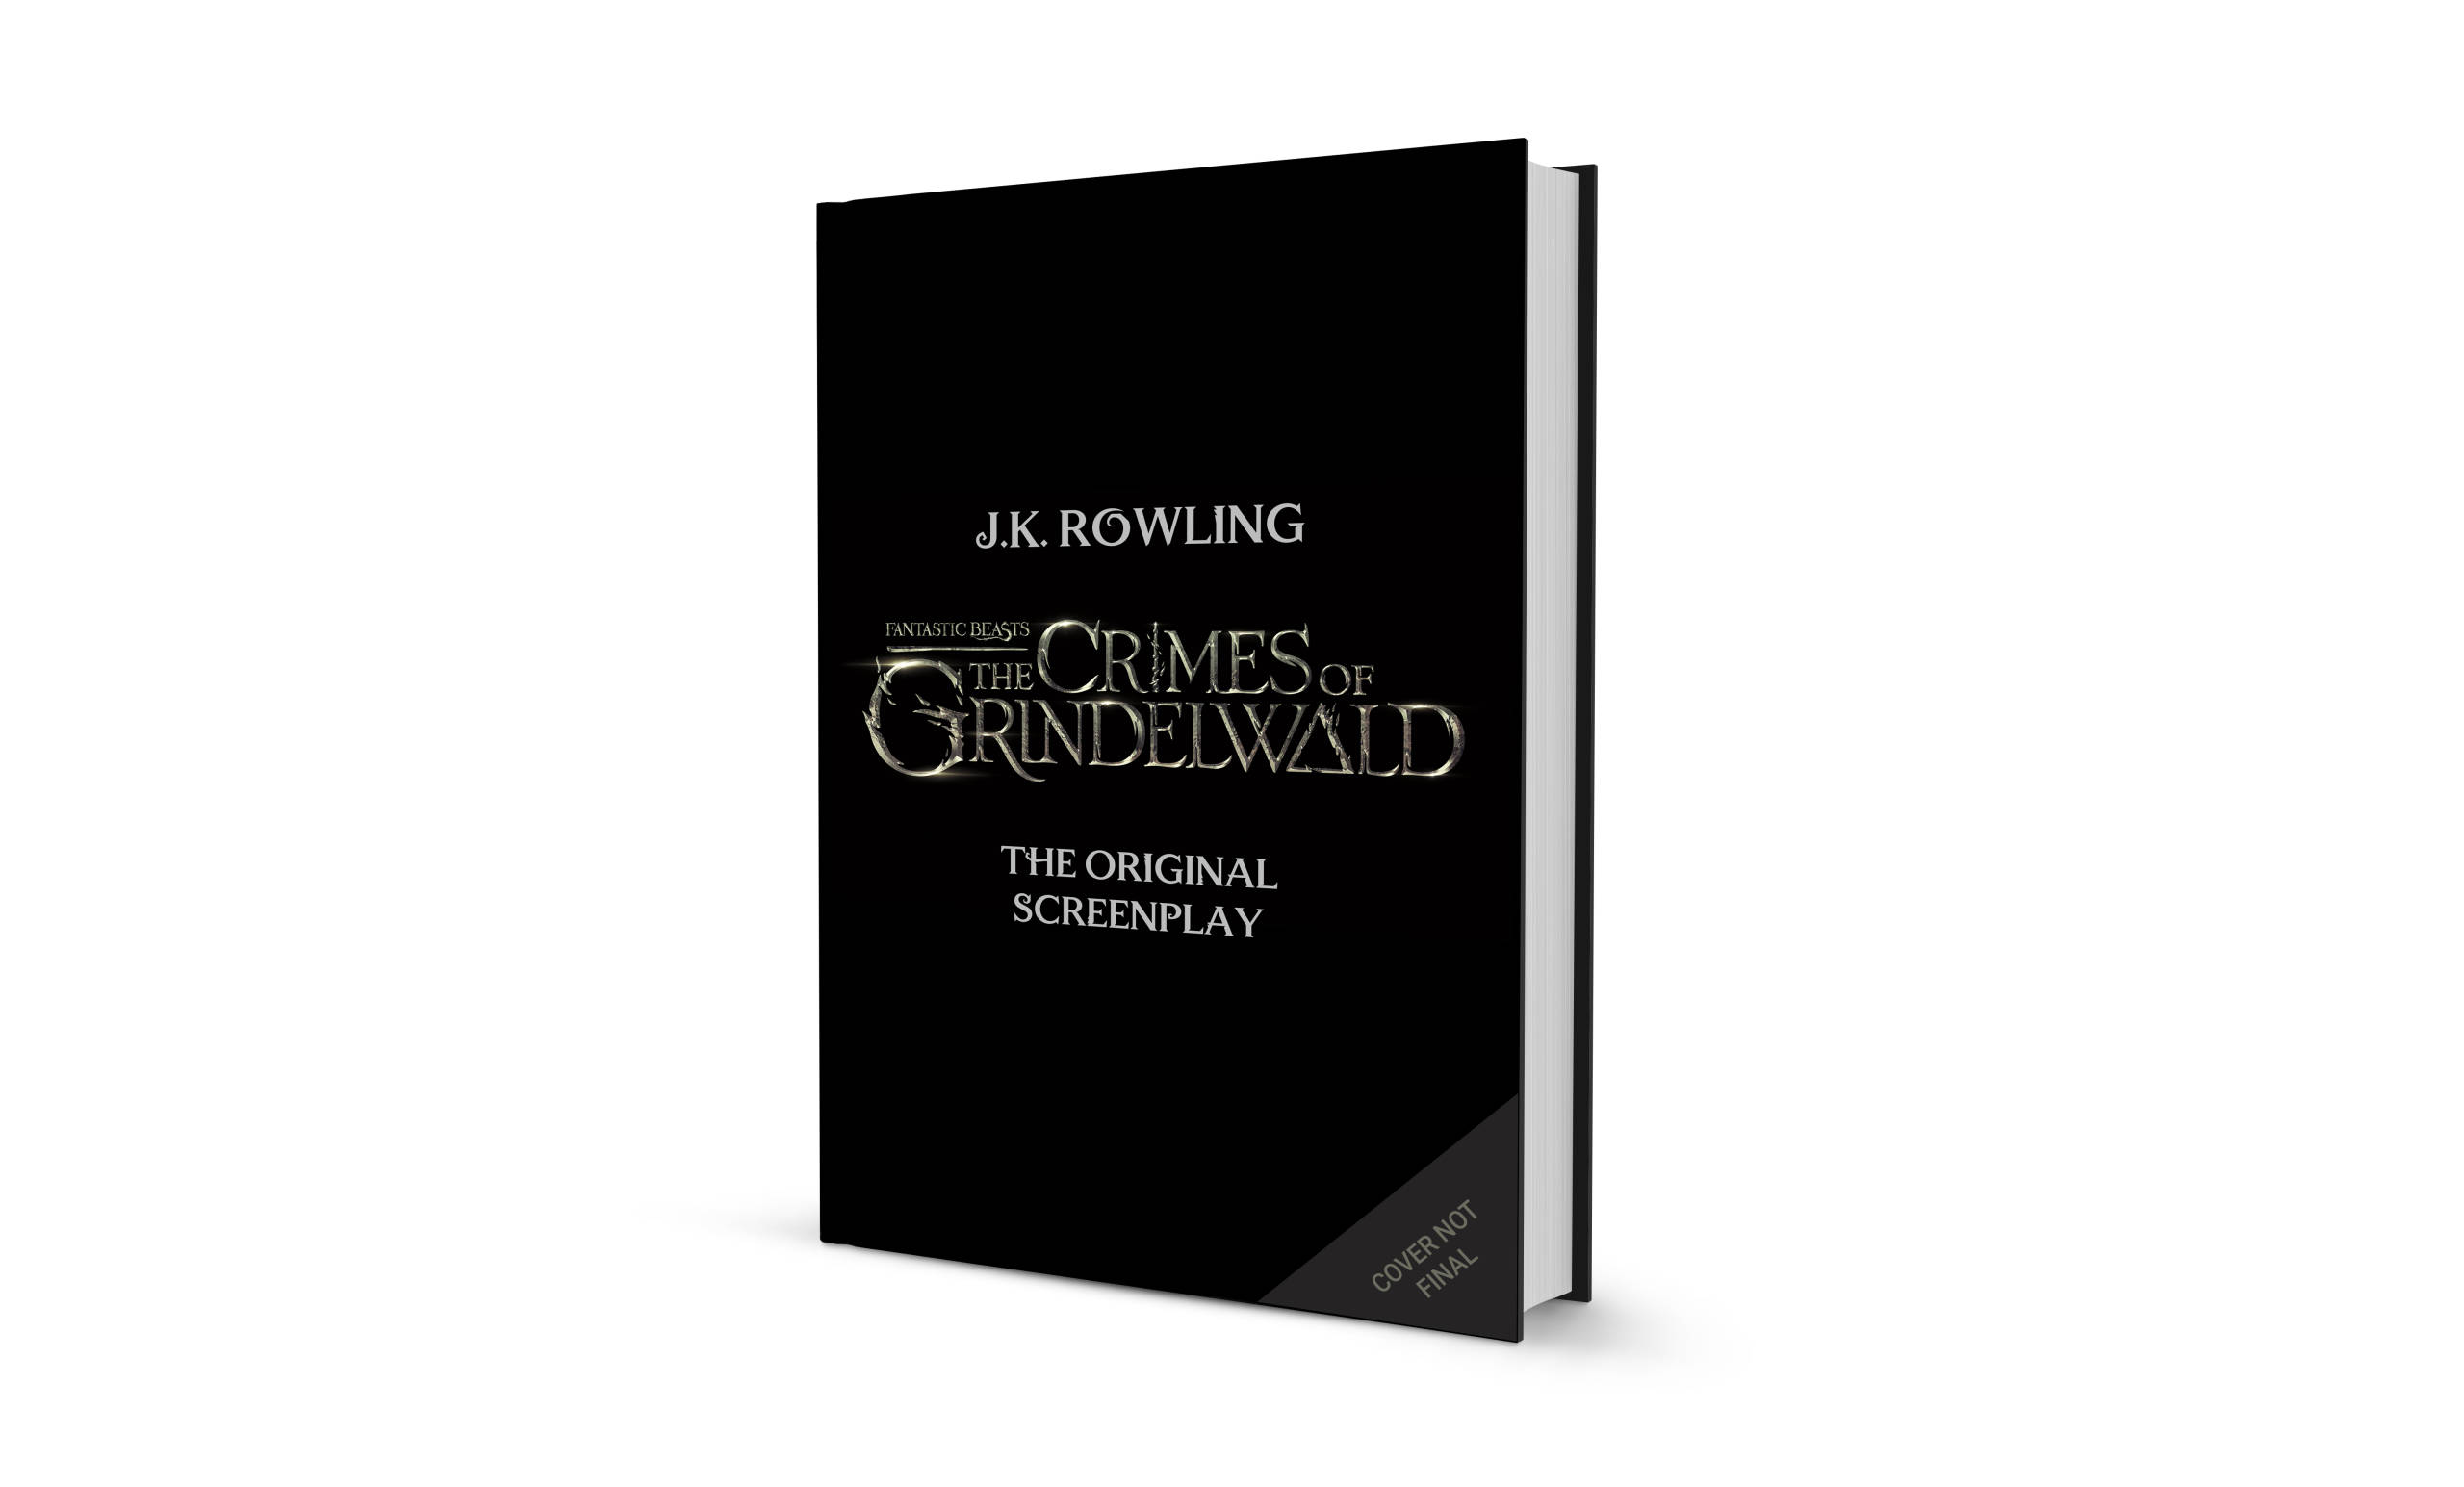 The screenplay for Fantastic Beasts: The Crimes of Grindelwald will be published later this year